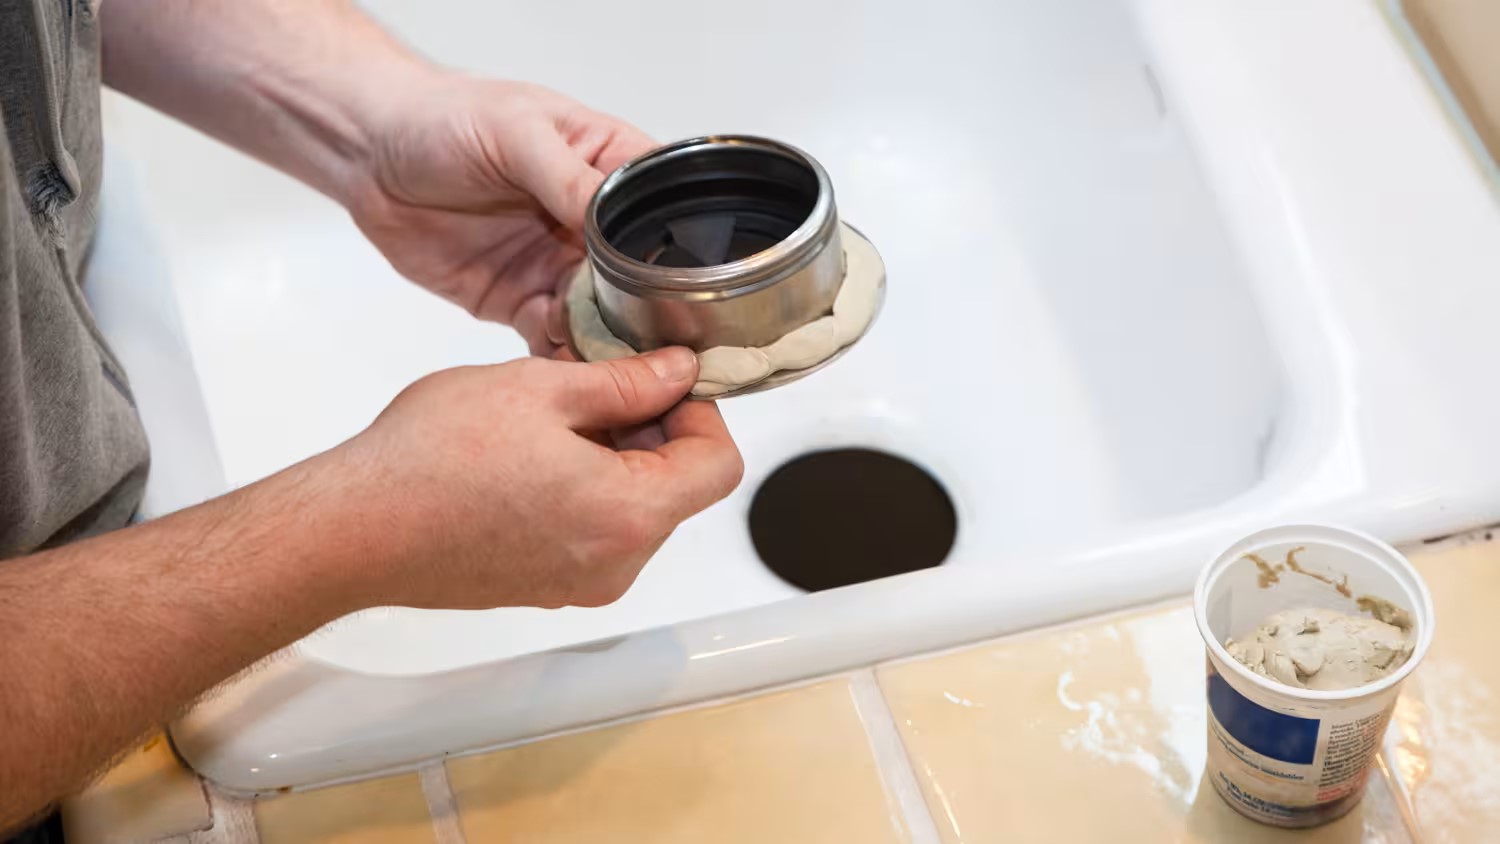 How To Seal Sink Drain